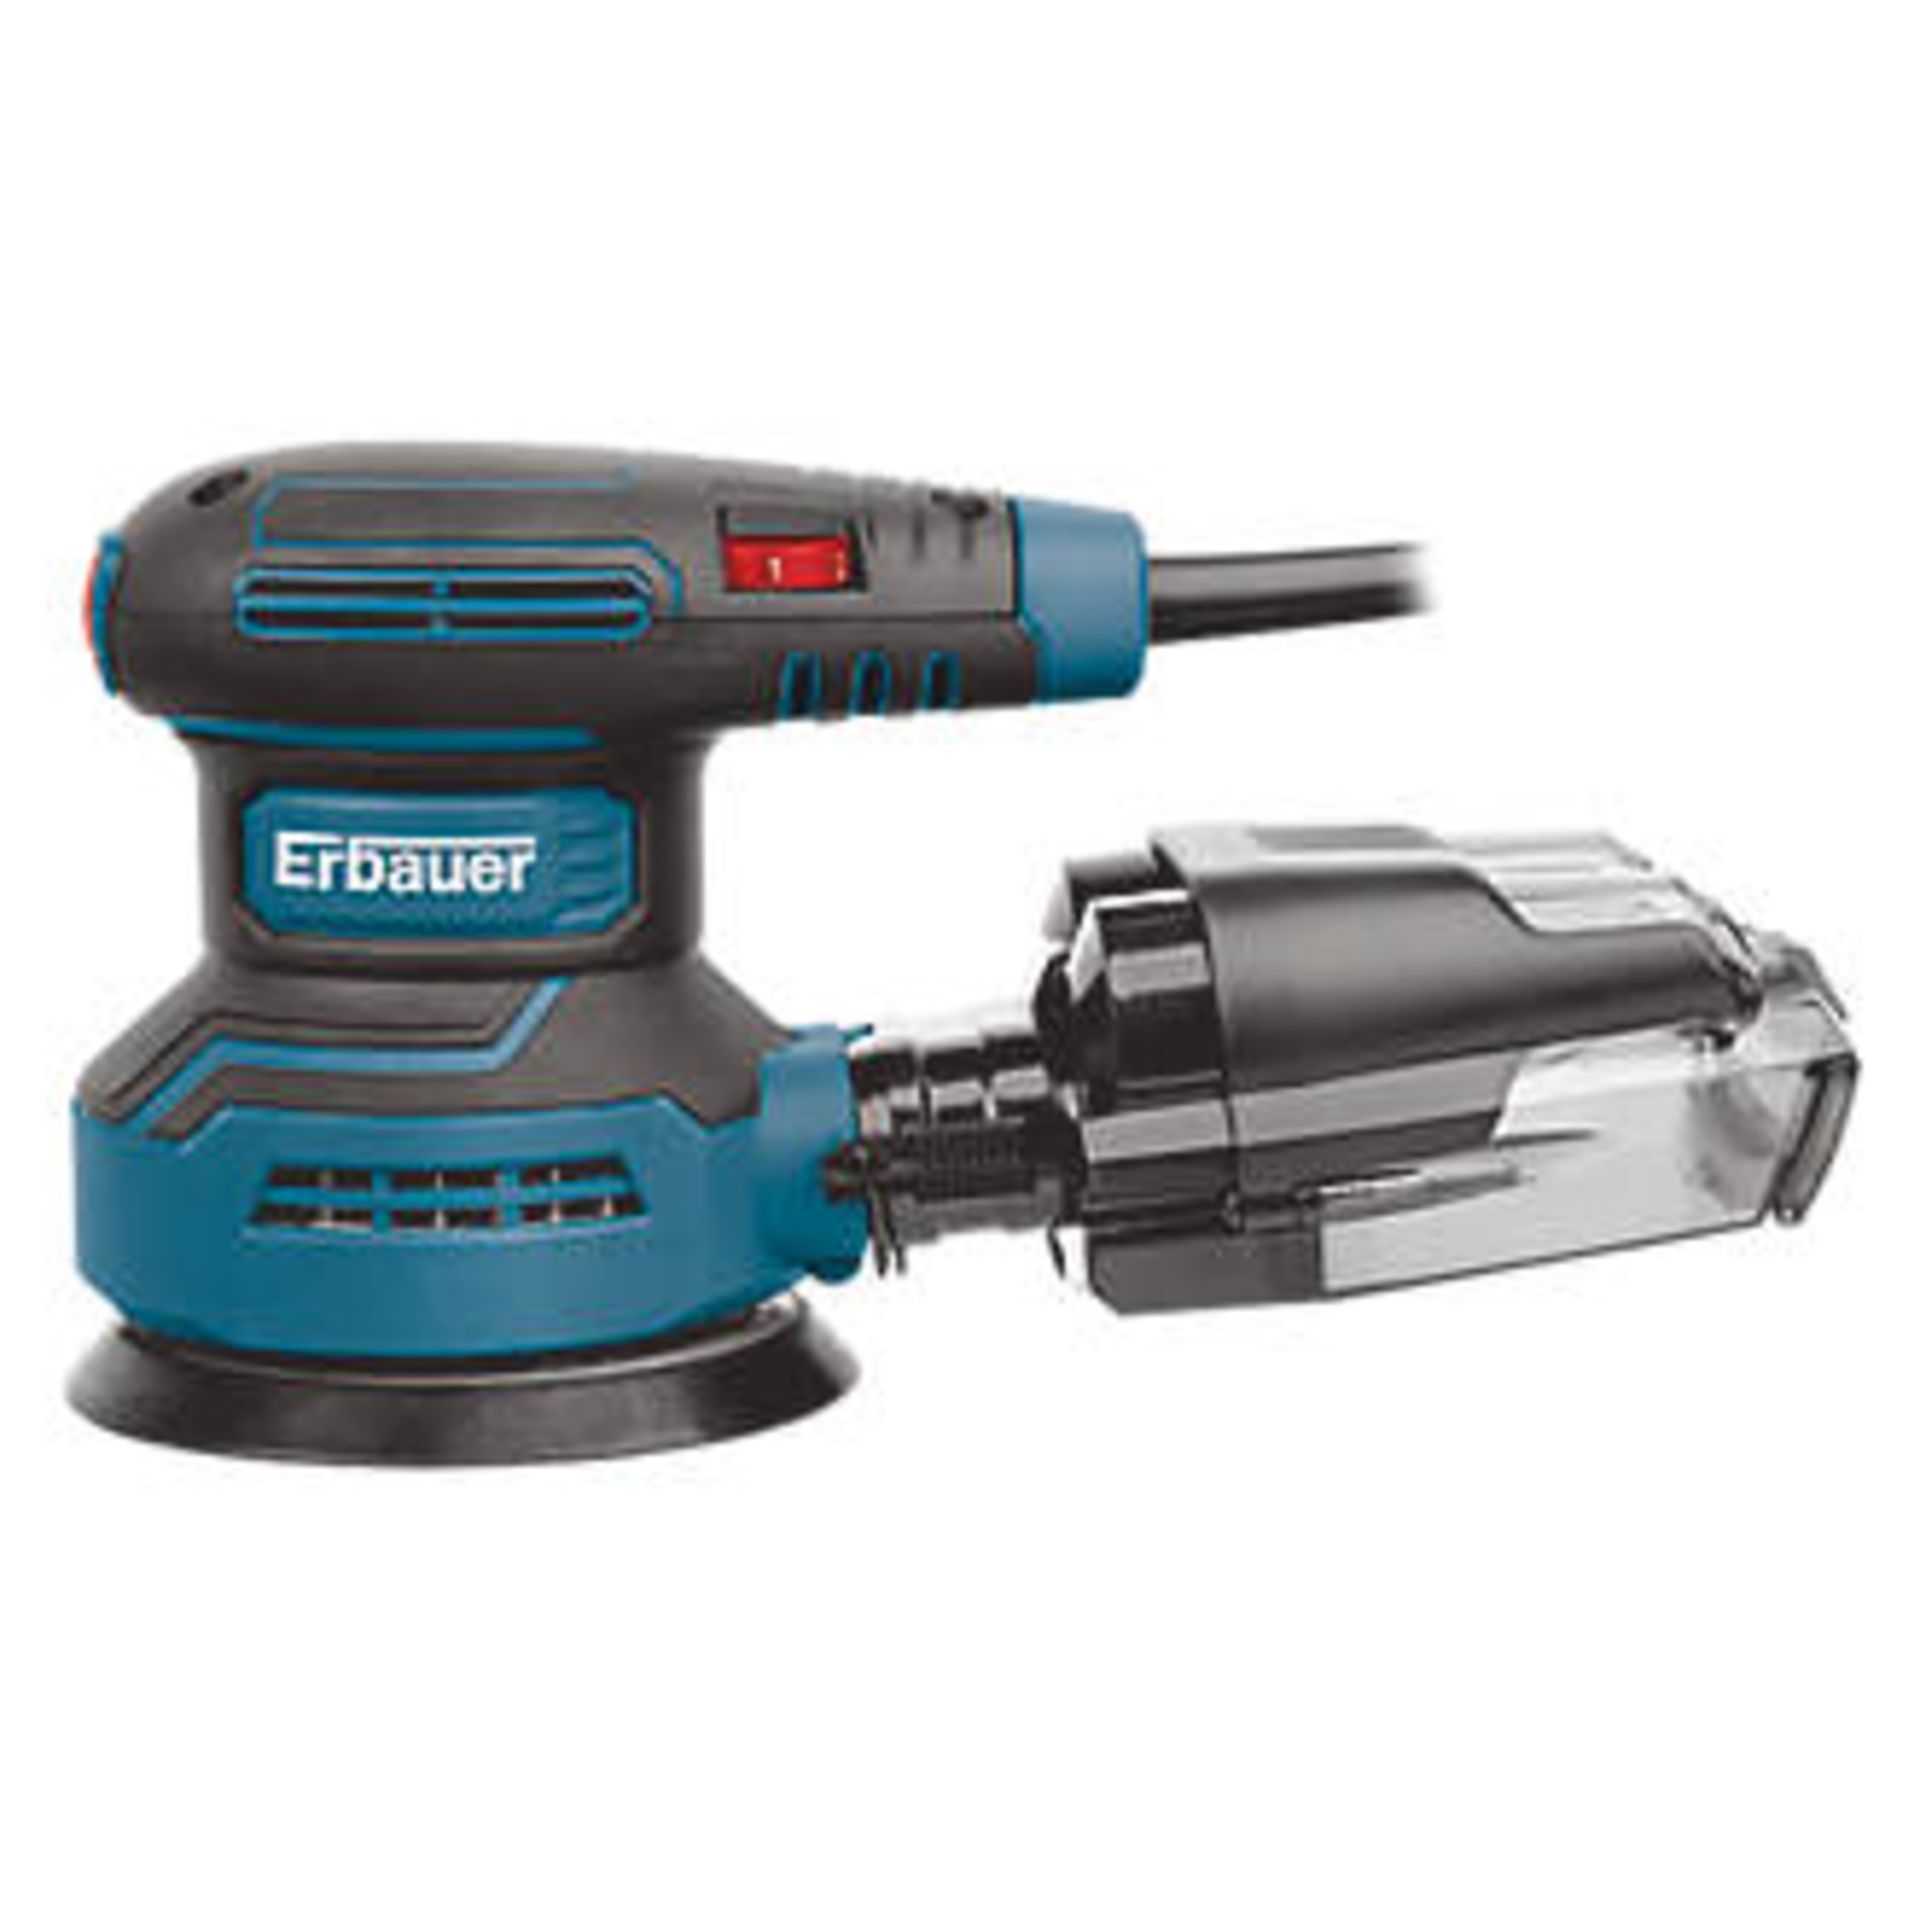 ERBAUER 400W ER0400 ORBITAL SANDER RRP £49.99Condition ReportAppraisal Available on Request- All